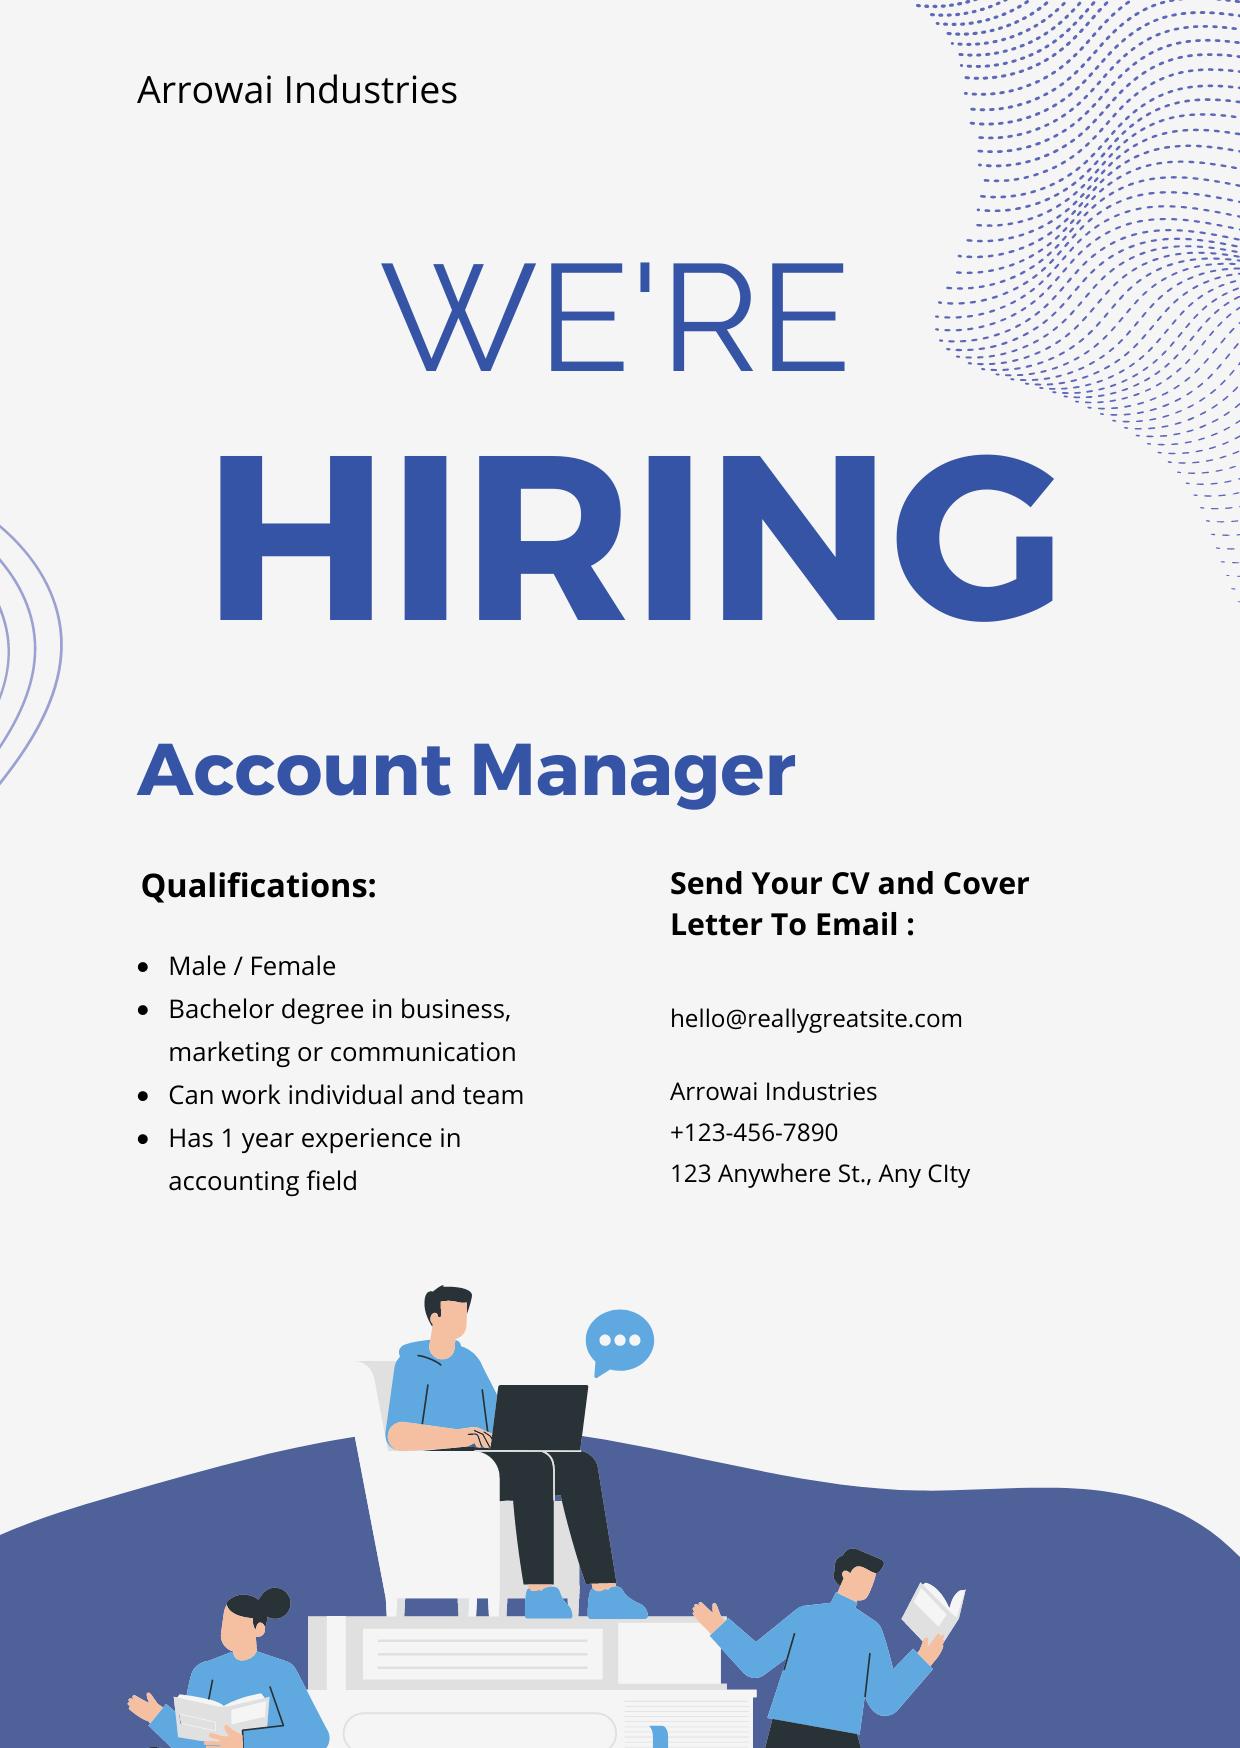 Arrowai Industries WE'RE HIRING Account Manager Qualifications:  Male / Female  Bachelor degree in business,